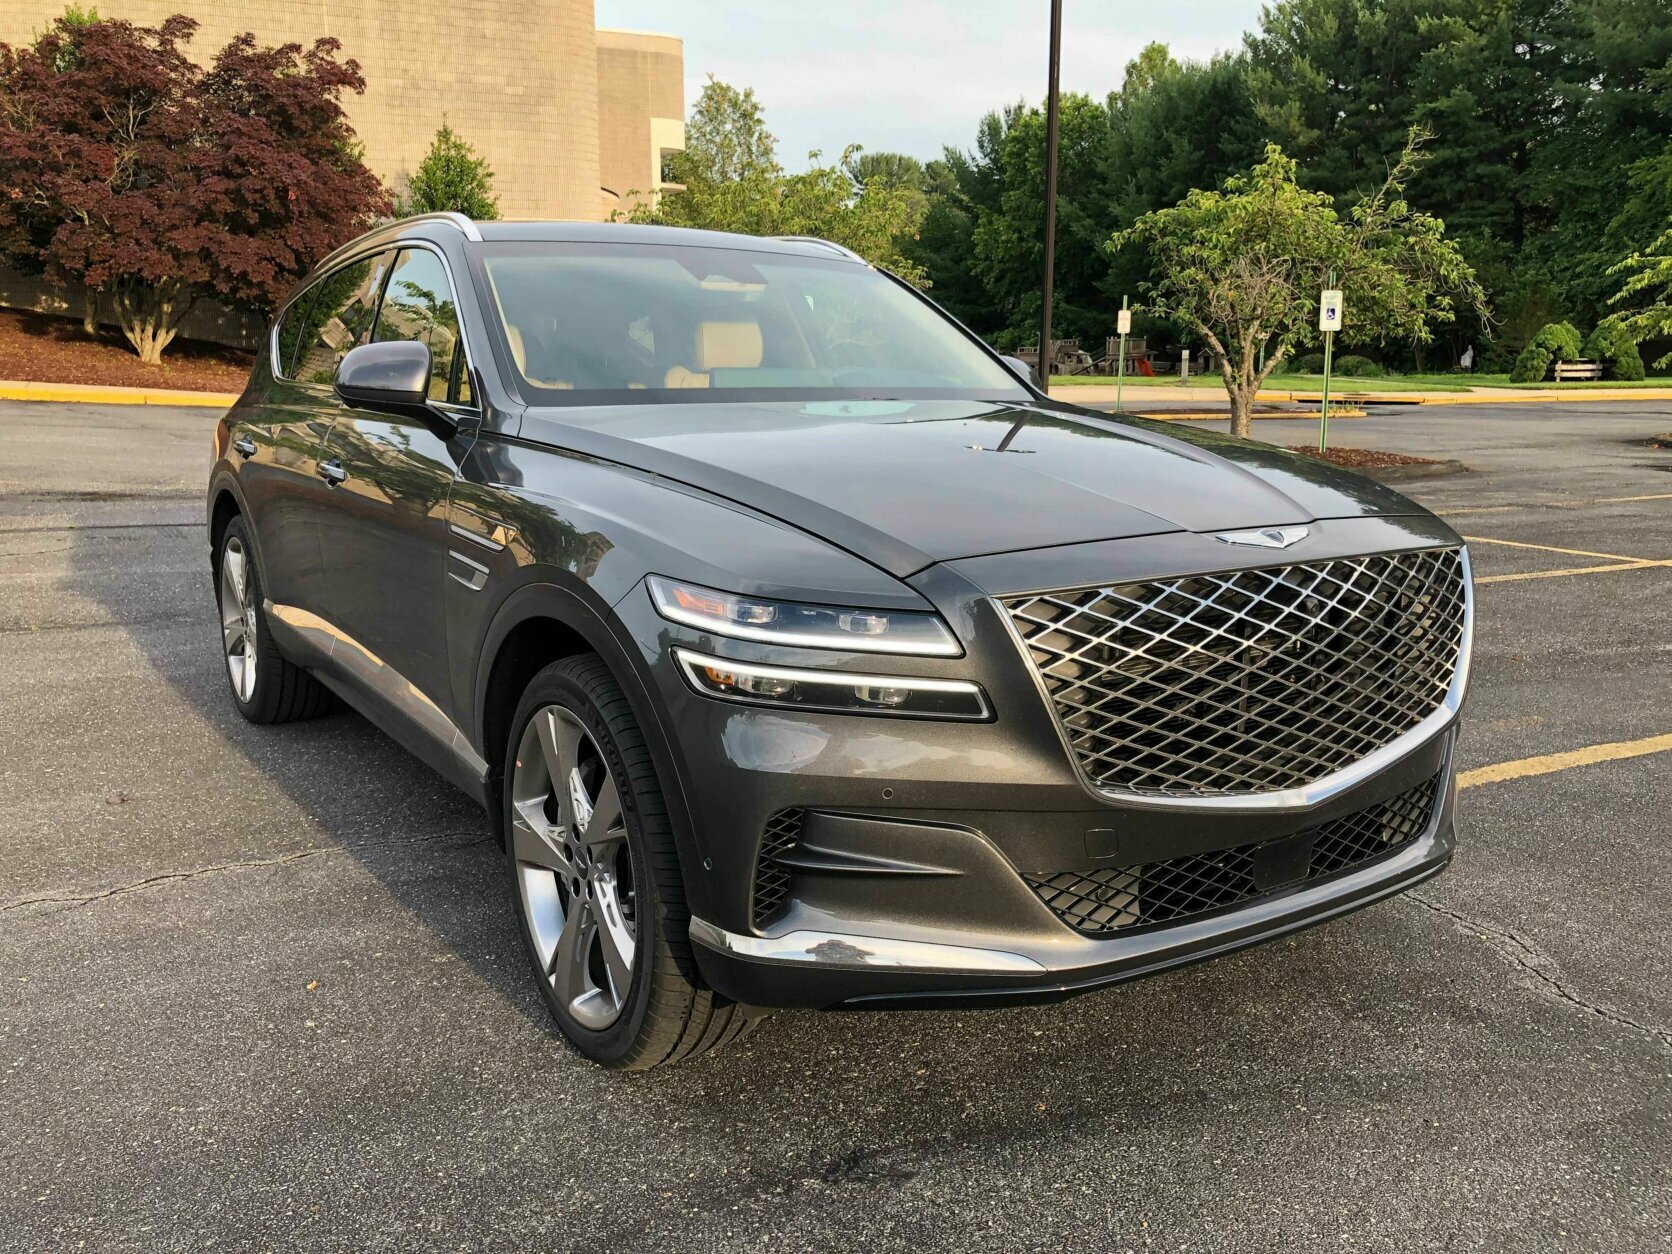 <p>As a newer company in the luxury market, the Genesis brand has been selling luxury cars that offer all the trimmings for an easier-to-live-with price tag. However, the company has been missing an SUV model until now.</p>
